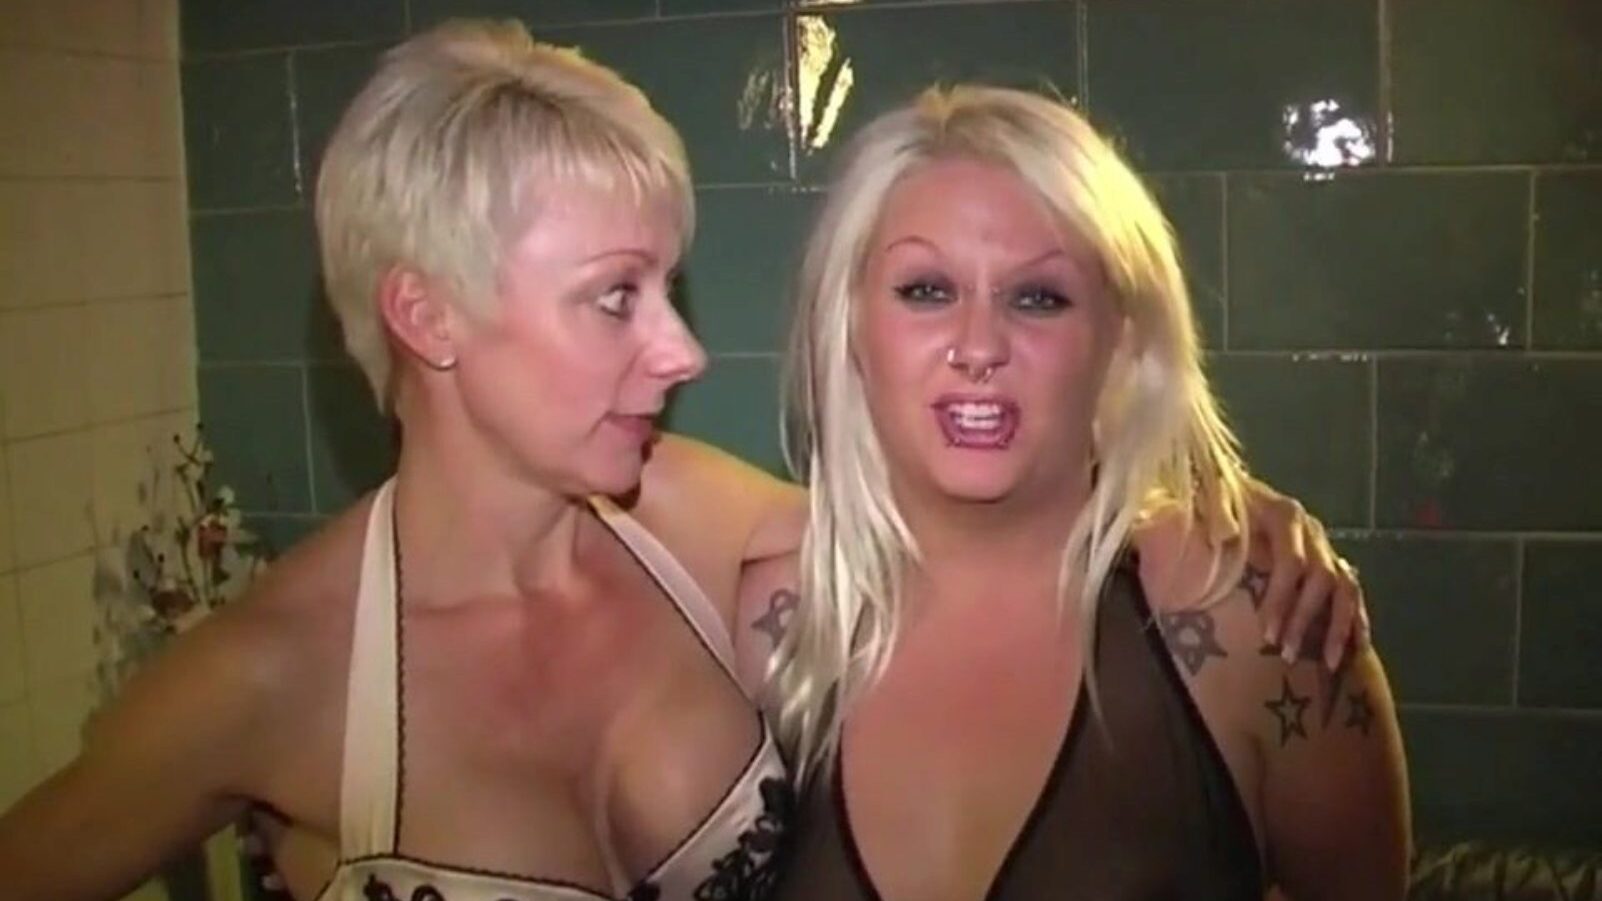 blastfrompast7: free afuk hd porno video 62 - xhamster watch blastfrompast7 tube bang-out clip for free-for-all on xhamster, with the hottest collection of british afuk, orgasm & friends hd pornography clip sequences